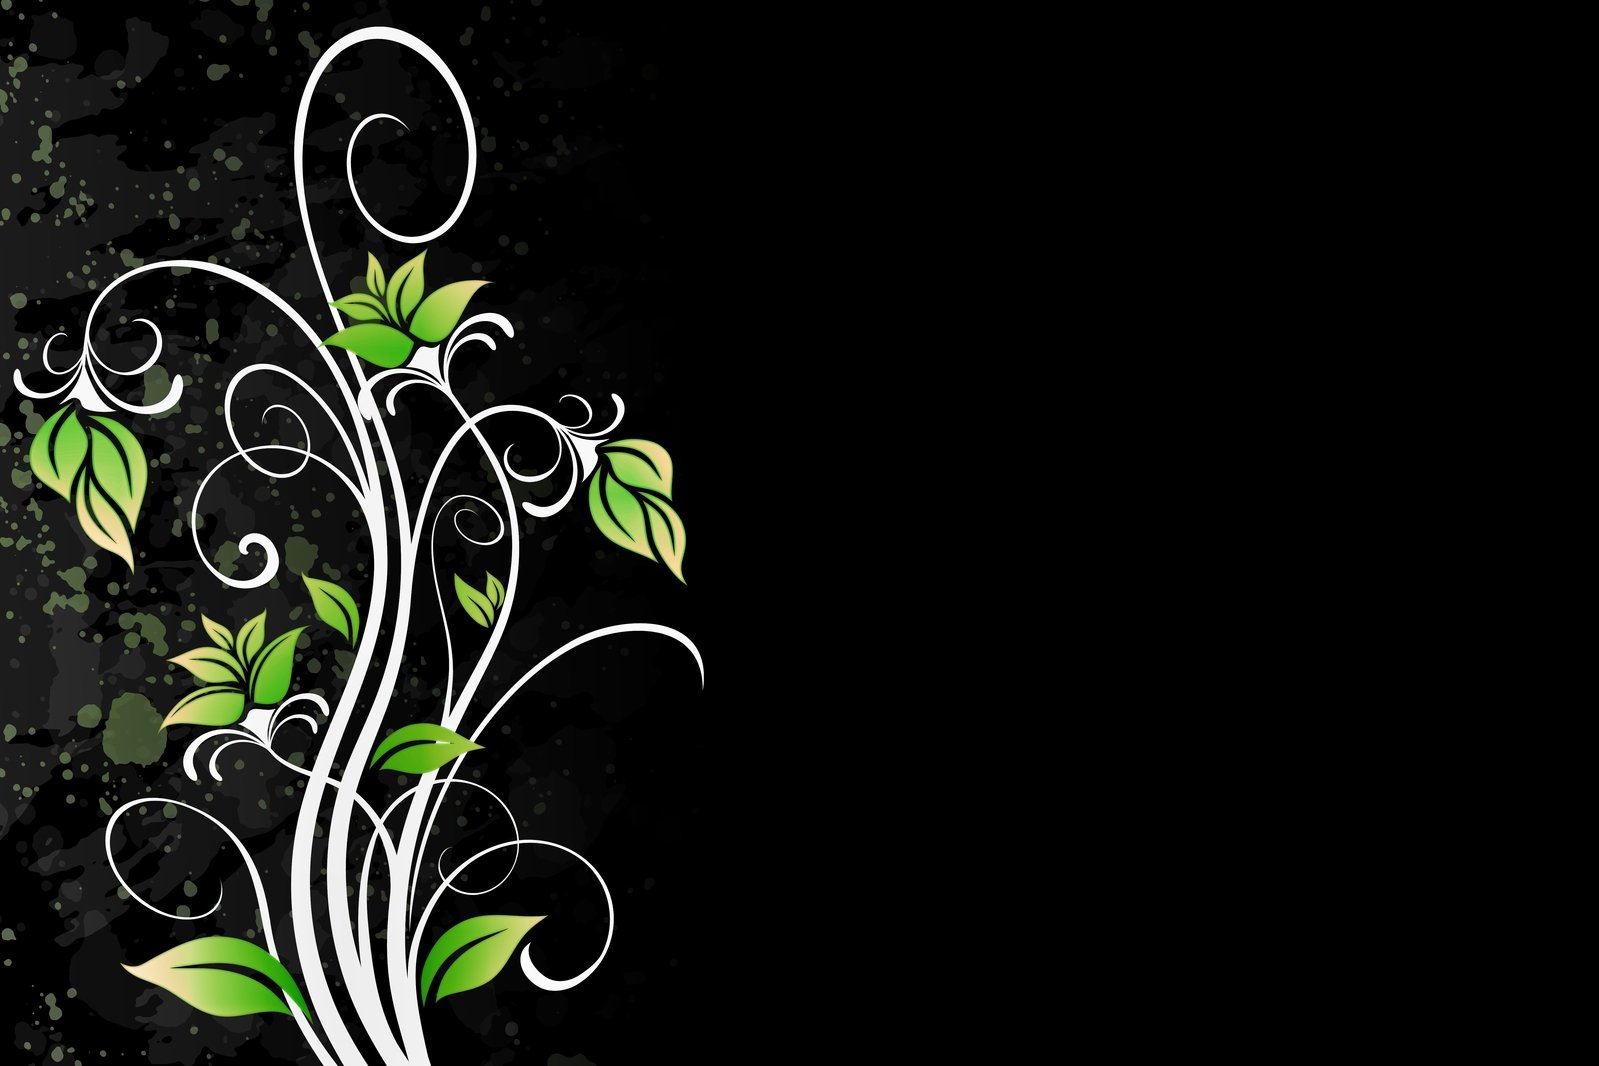 a green and white flowered plant is on a black background